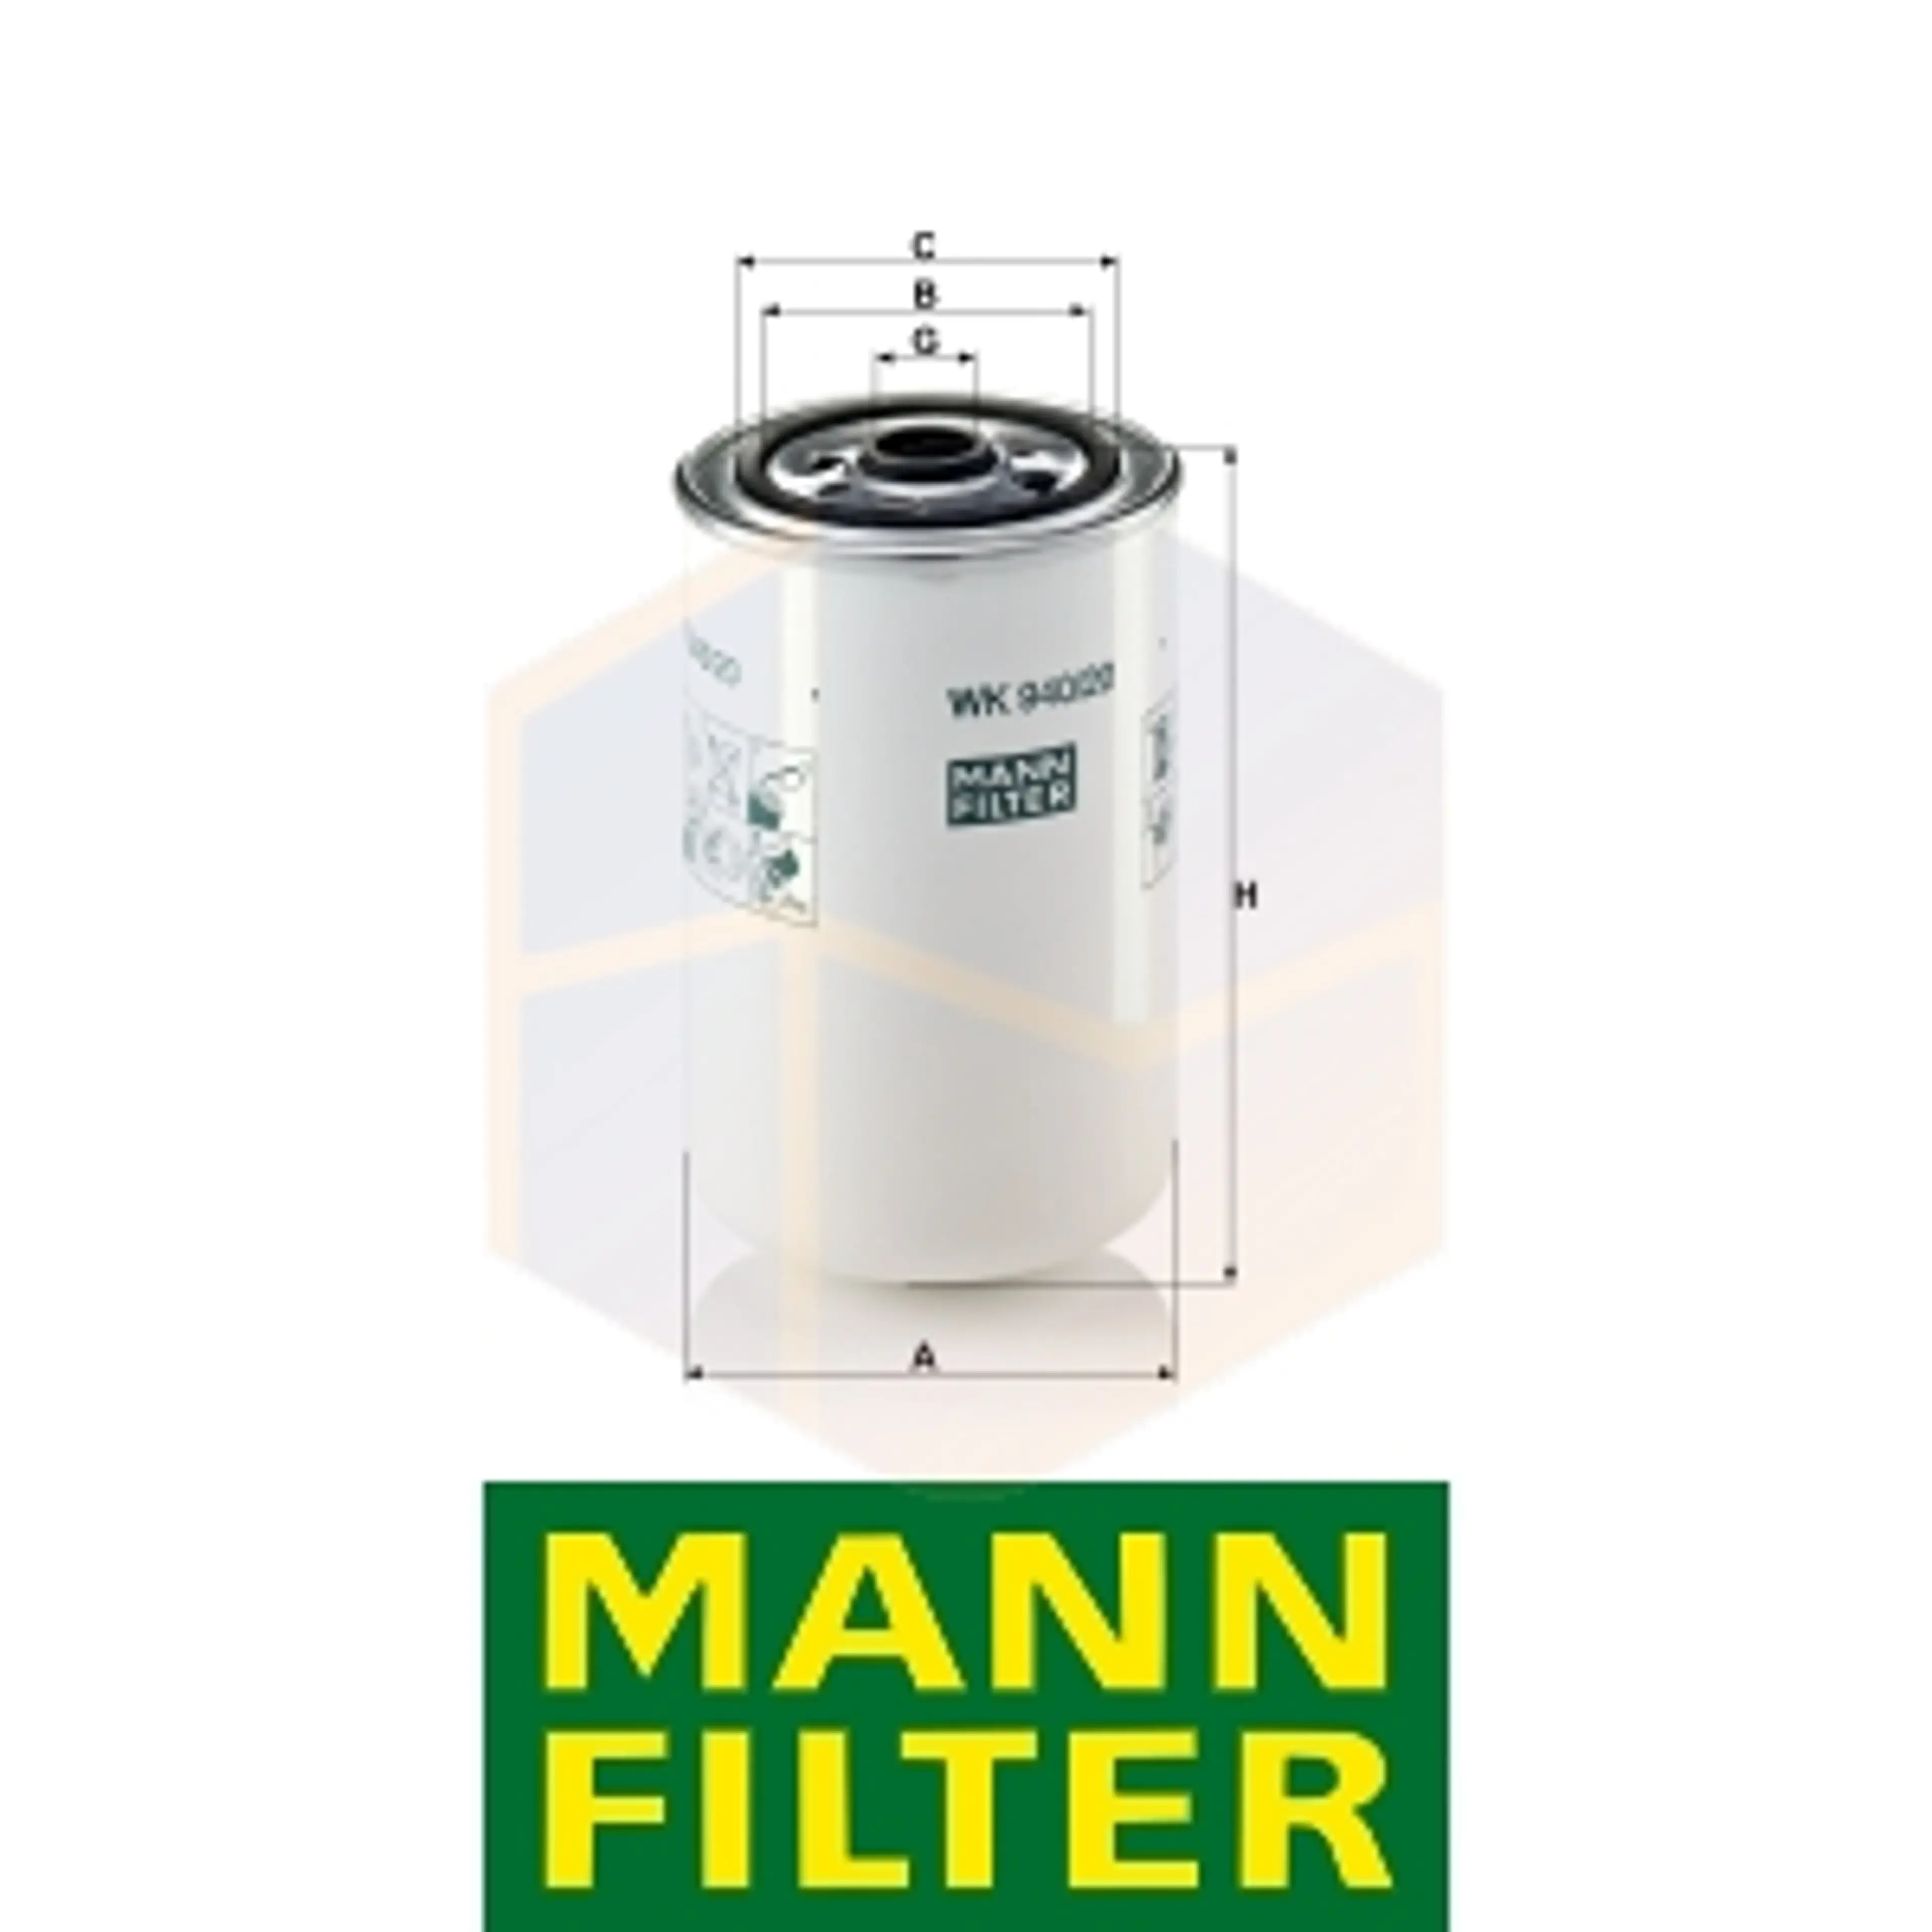 FILTRO COMBUSTIBLE WK 940/20 MANN